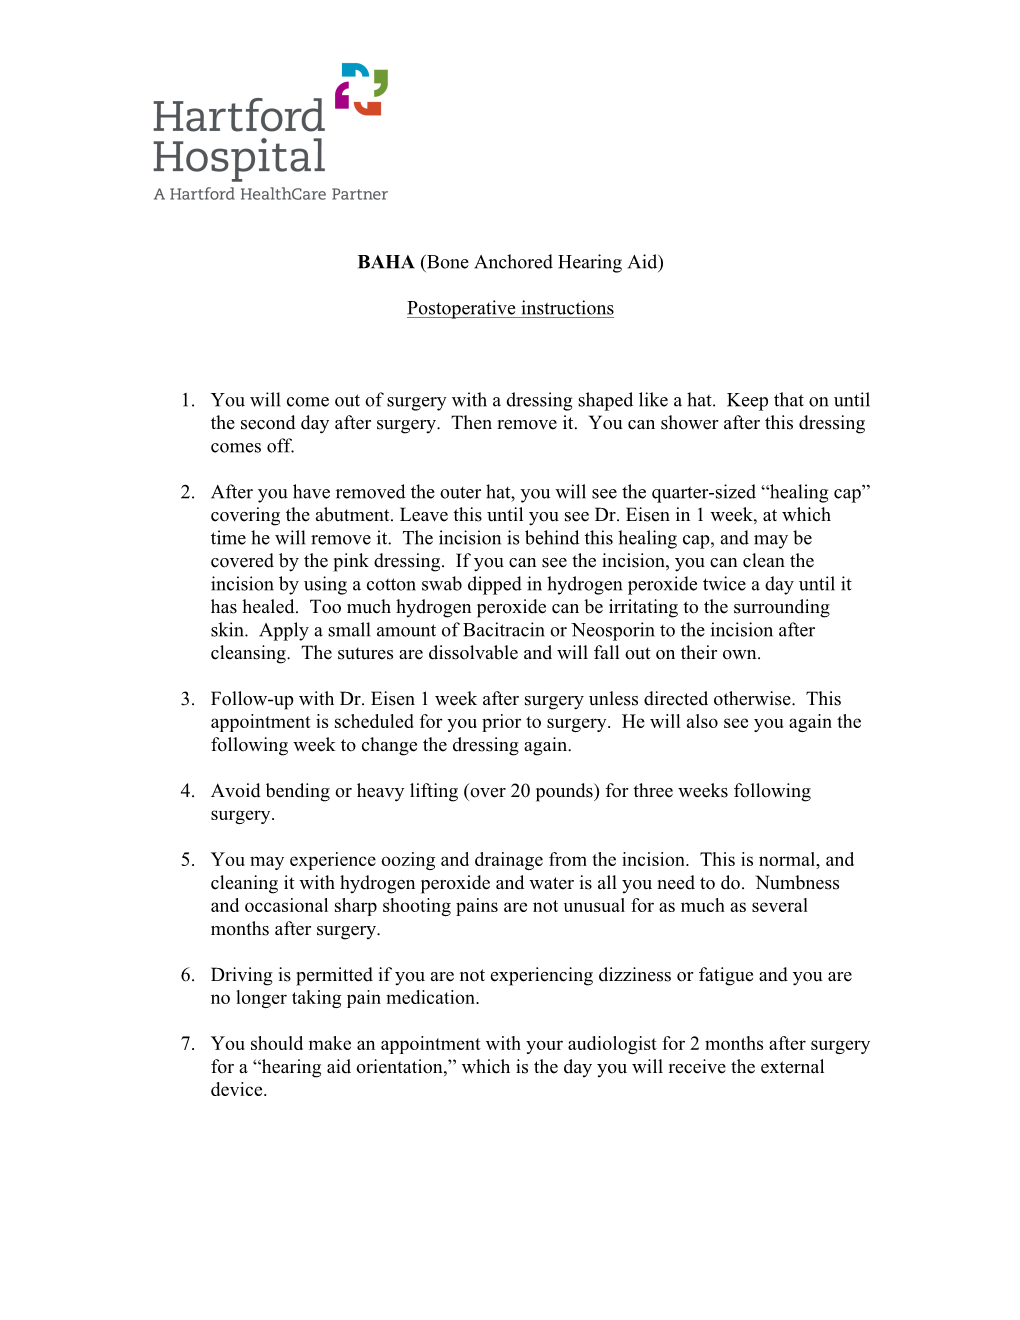 POST-OP Instructions for BAHA Surgery